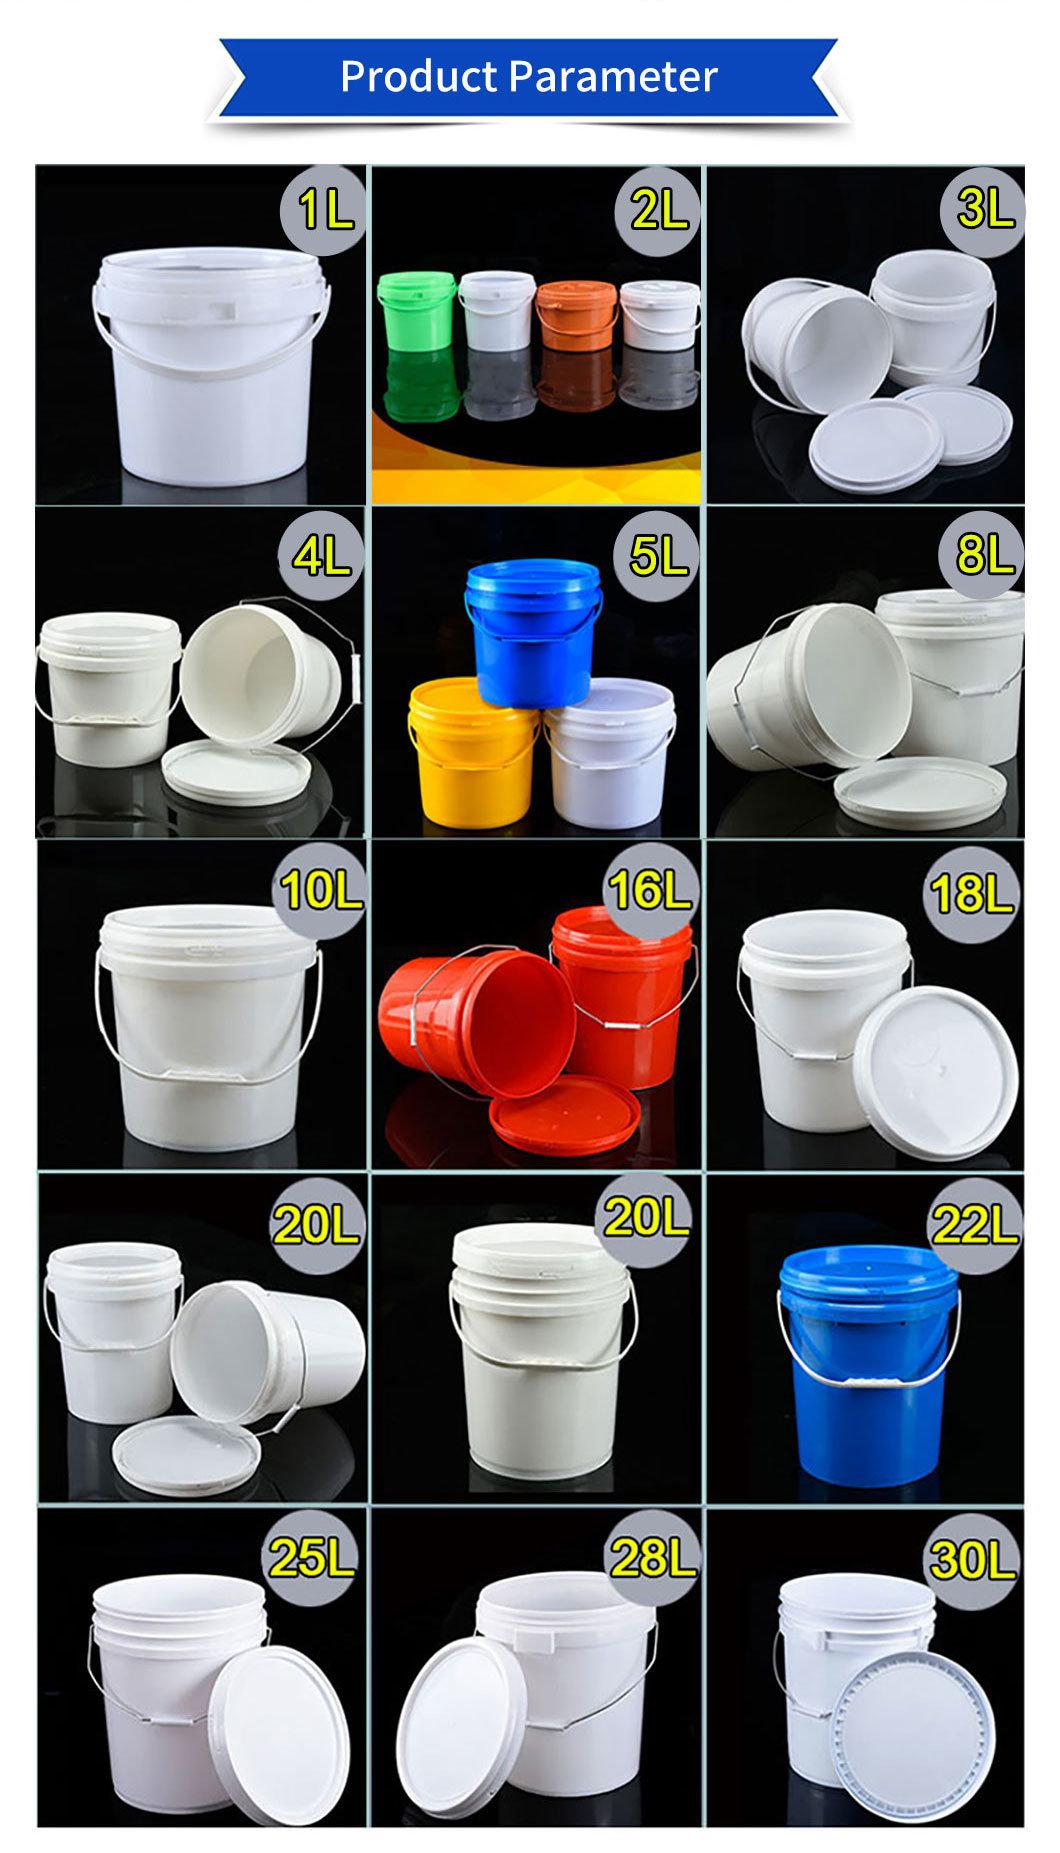 Clear/Transparent Plastic Bucket /Pails for Food Packing